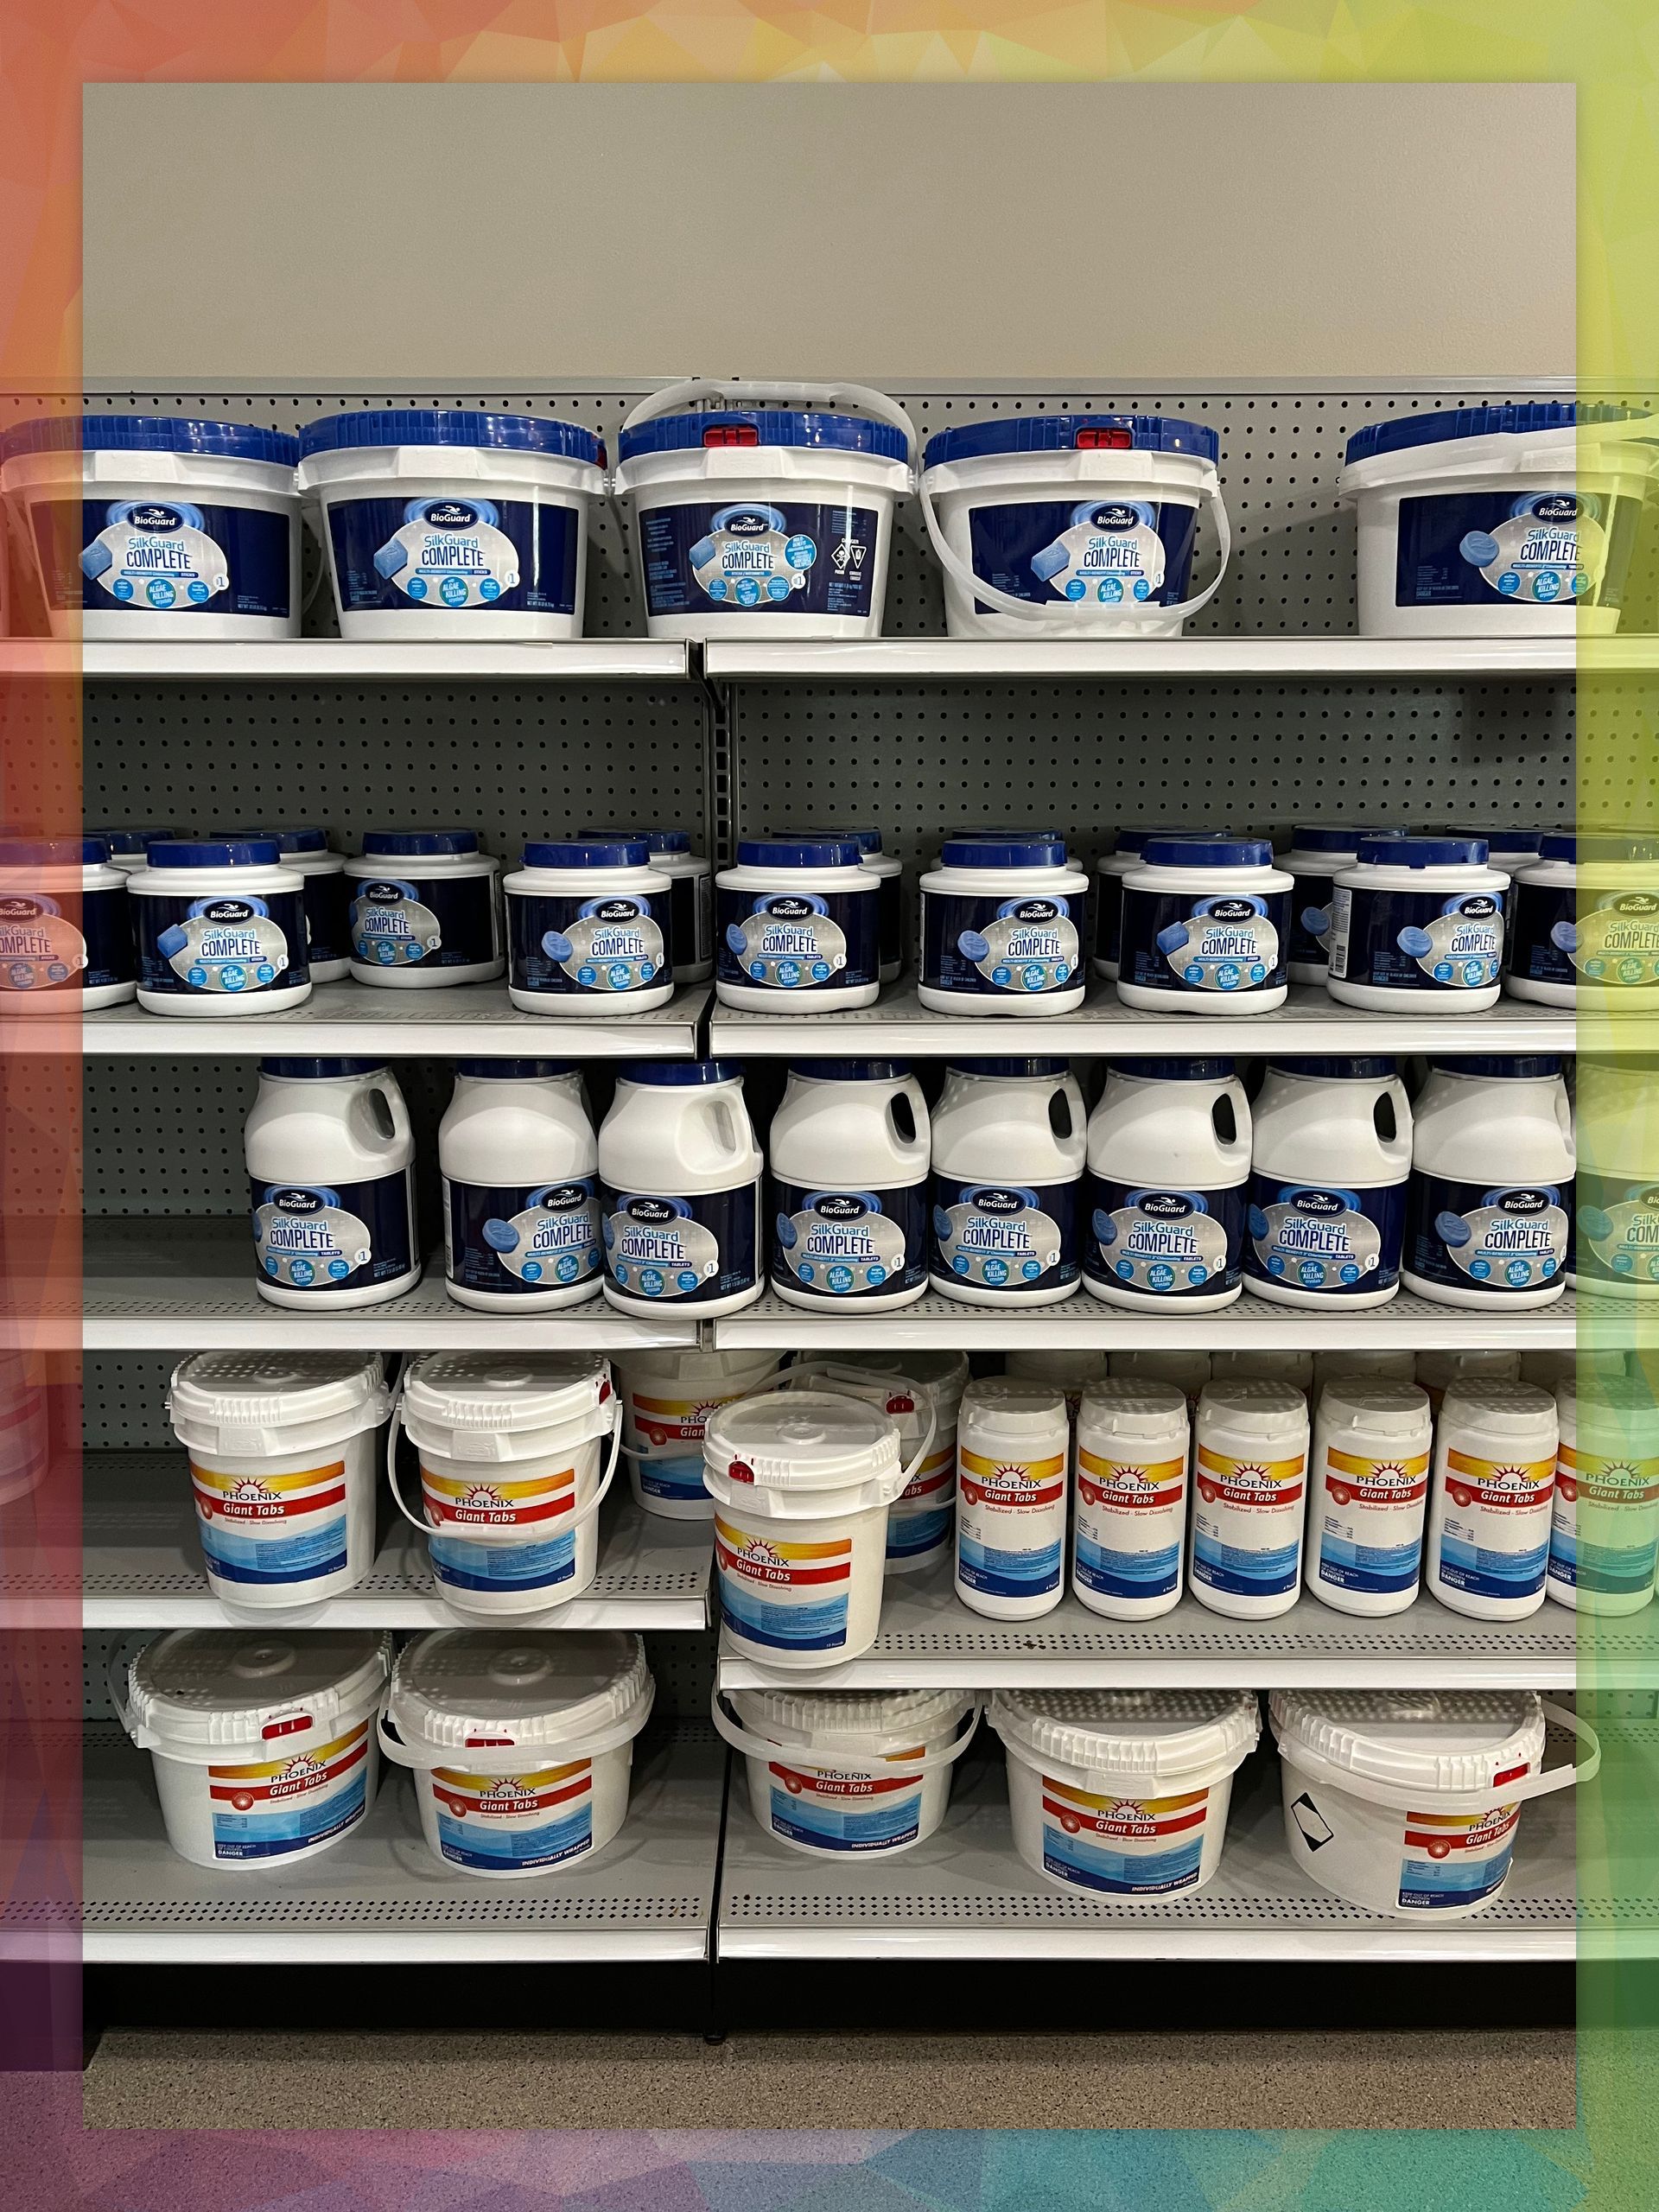 A store shelf filled with buckets and bottles of pool chemicals.